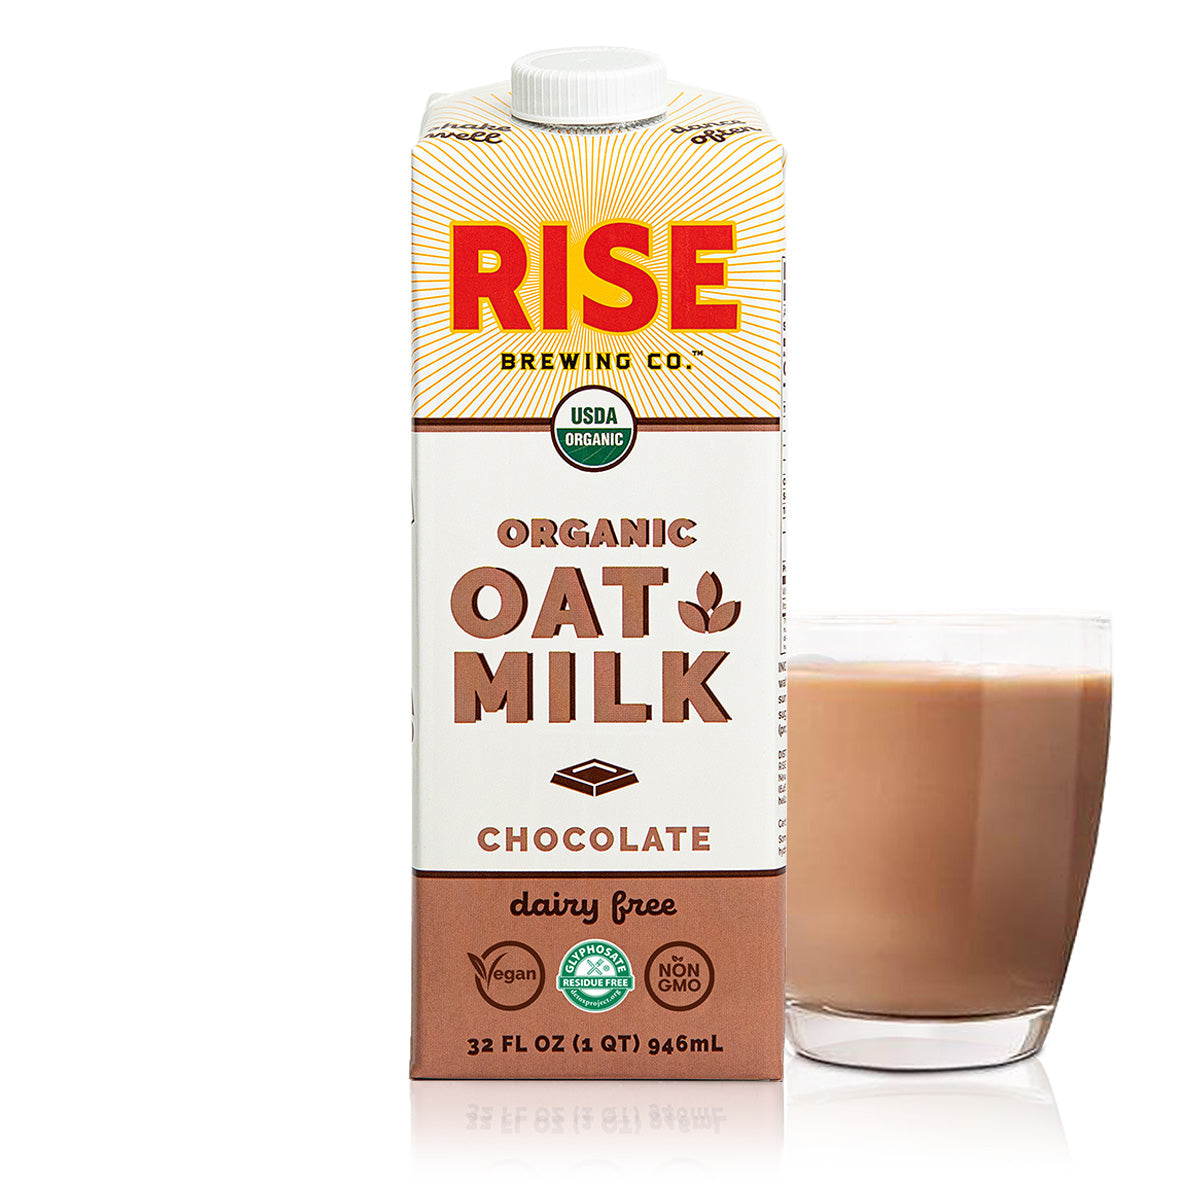 RISE Brewing Co. Organic Oat Milk Variety Pack - Chocolate